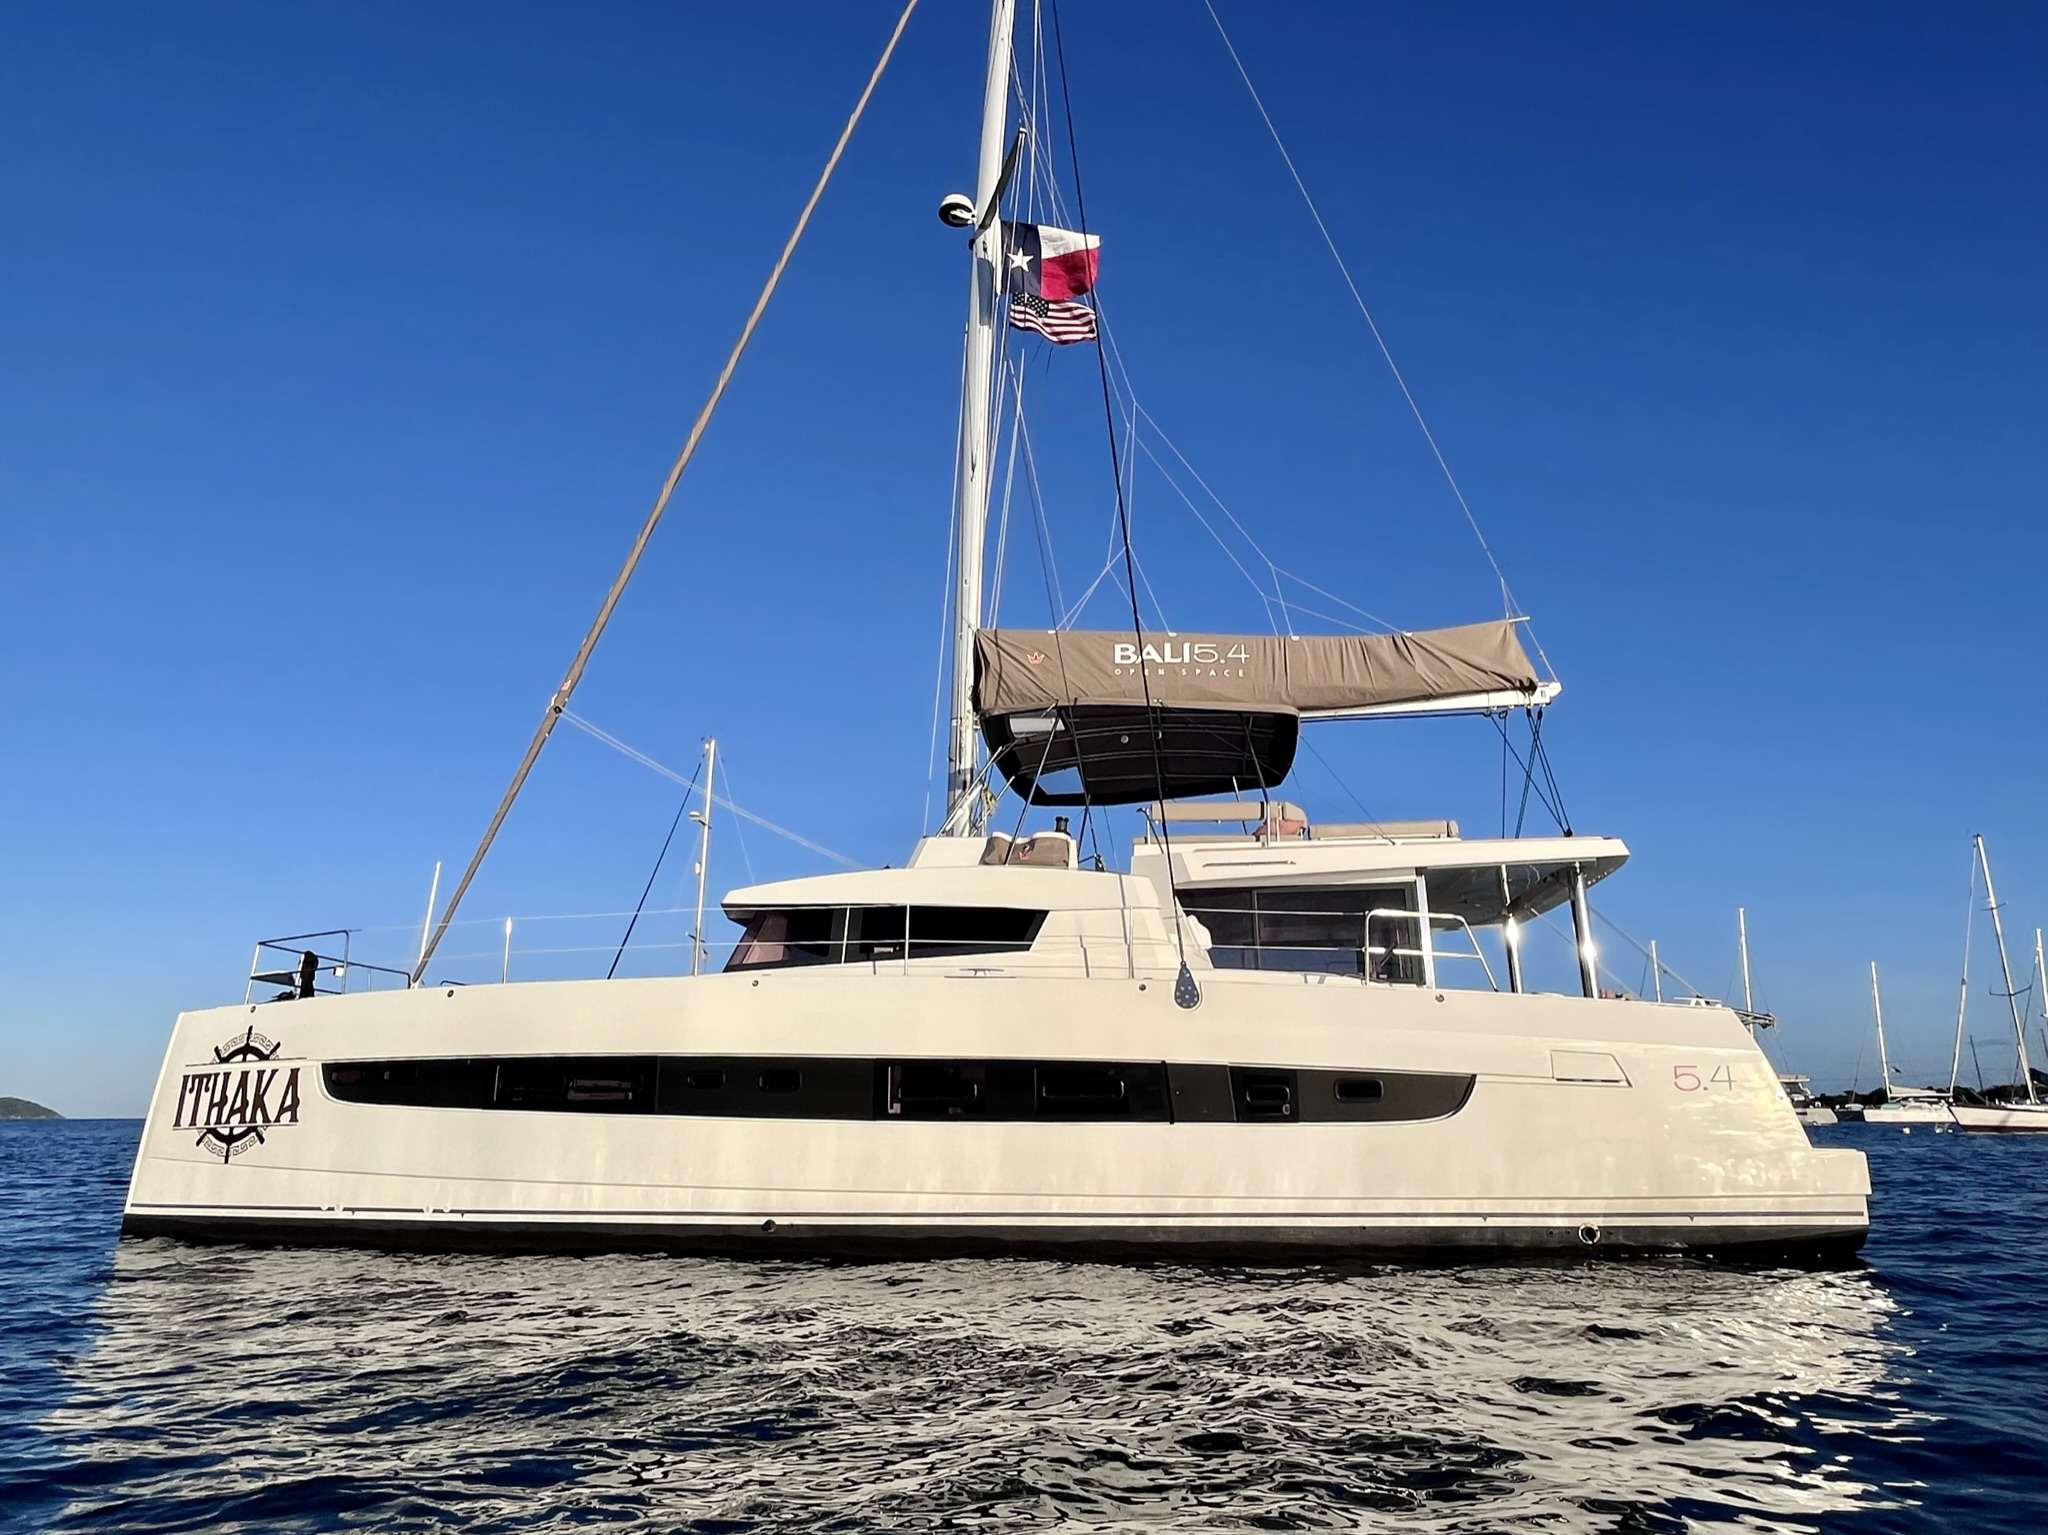 This brand new 2022 luxurious sailing catamaran, ITHAKA, is definitely a fine example of what Bali can design. As you step on board in to a beautifully appointed cockpit, complete with teak floors and dining table for eight and a comfortable lounging bench, you immediately realize what a unique charter experience you are about to have. As you make your way up to the flybridge you&rsquo;ll be blown away by the amazing turquoise water with 360&deg; views and enjoy the up-close view of the sails. It&rsquo;s also a great place to read your favorite book or a favorite spot for appetizers and cocktails at sundown. The main salon is comfortable and luxurious with open spaces and natural light fed by all the windows surrounding you. All four guest cabins are spacious with large windows and offer plenty of natural light. For your comfort, every cabin offers queen sized beds and private baths with dedicated shower stalls as well as flatscreen TVs and a stereo system for both central and individual cabin control. The high level of finishing throughout every cabin reflects the luxury that you would expect from a yacht of this caliber. With all the different areas, ITHAKA is show-stopper and has enough amenities for everyone to enjoy!

TOYS: 2 Stand Up Paddle Boards, Snorkeling Gear, Floating Mat, Tubes 1 Adult Water Ski Set, 1 Kneeboard, 1 Subwing, 2 Sea Scooters, 2 Fishing Rods &amp; Onshore Games.

DIVING: Offered via rendezvous only